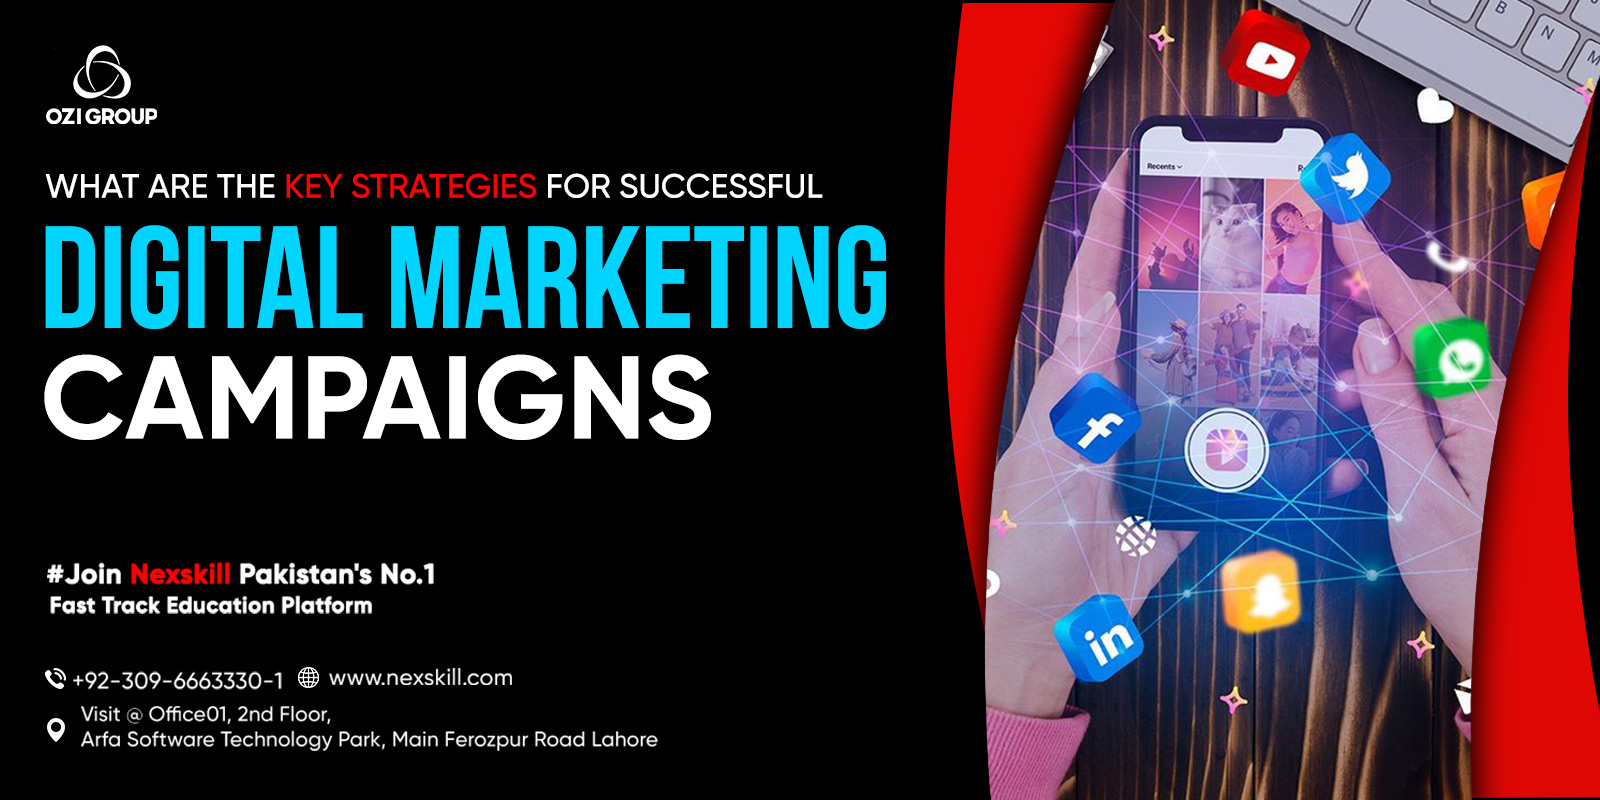 What are the Key Strategies for Successful Digital Marketing Campaigns?